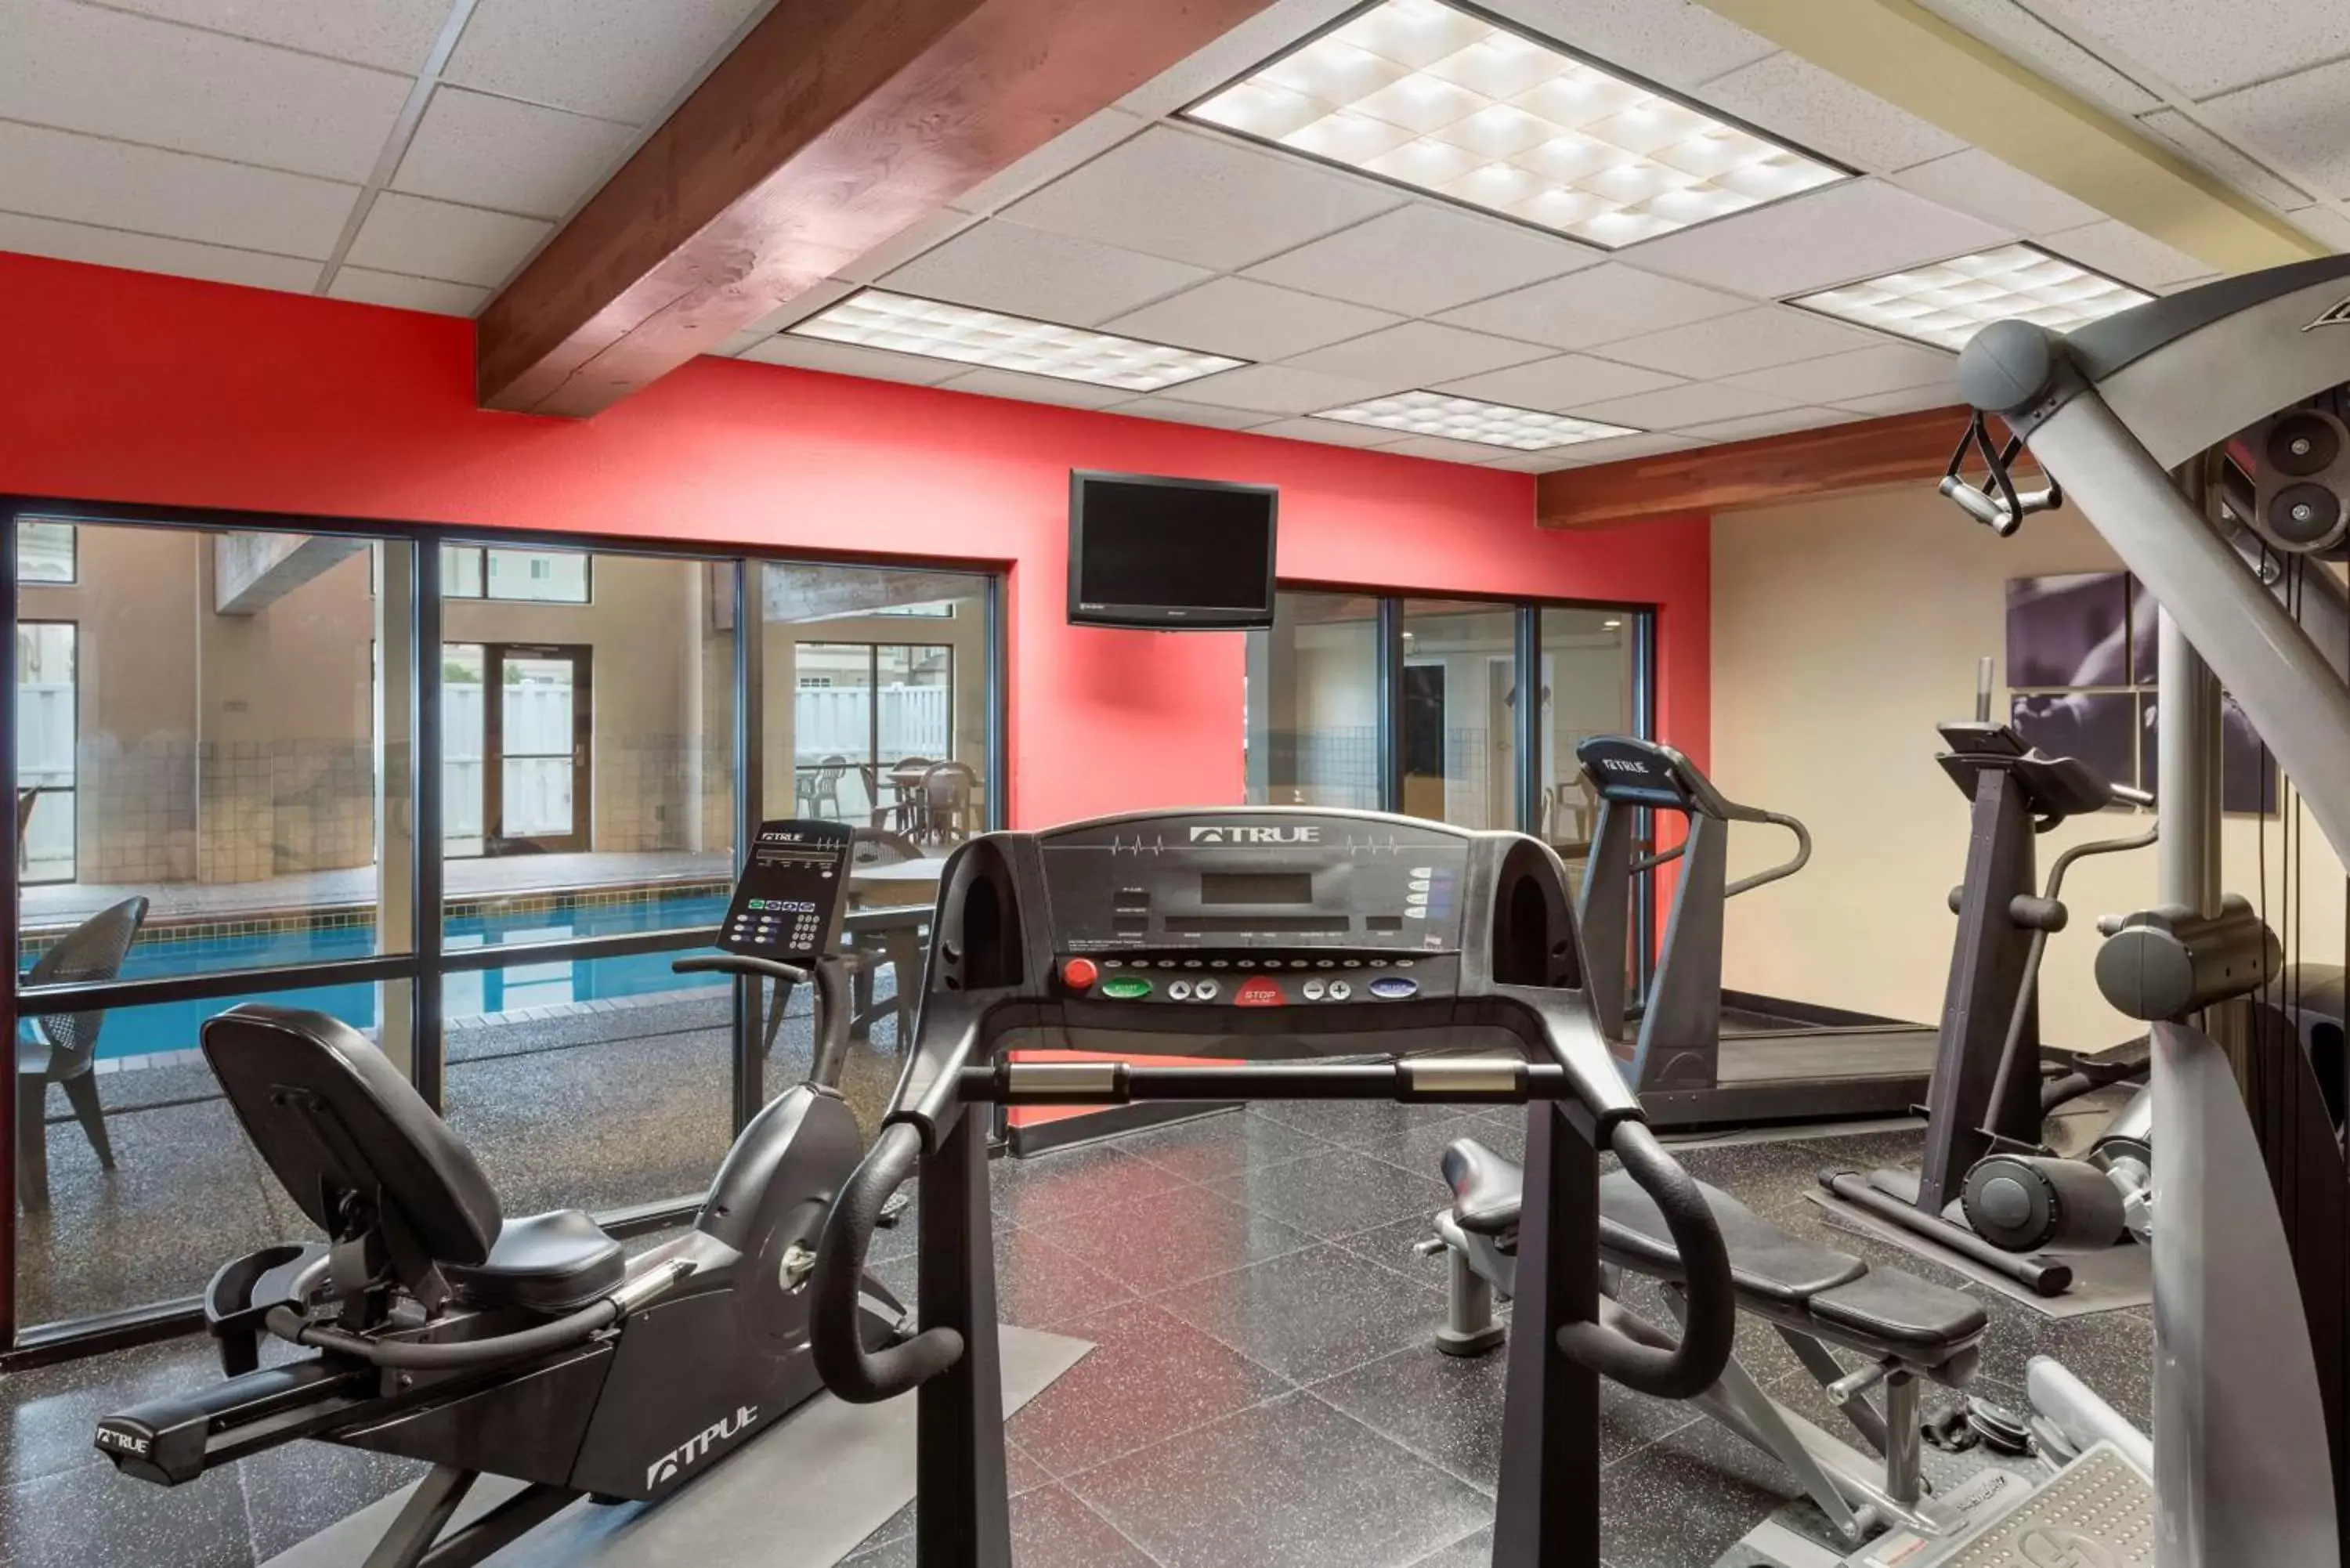 Activities, Fitness Center/Facilities in Country Inn & Suites by Radisson, Council Bluffs, IA